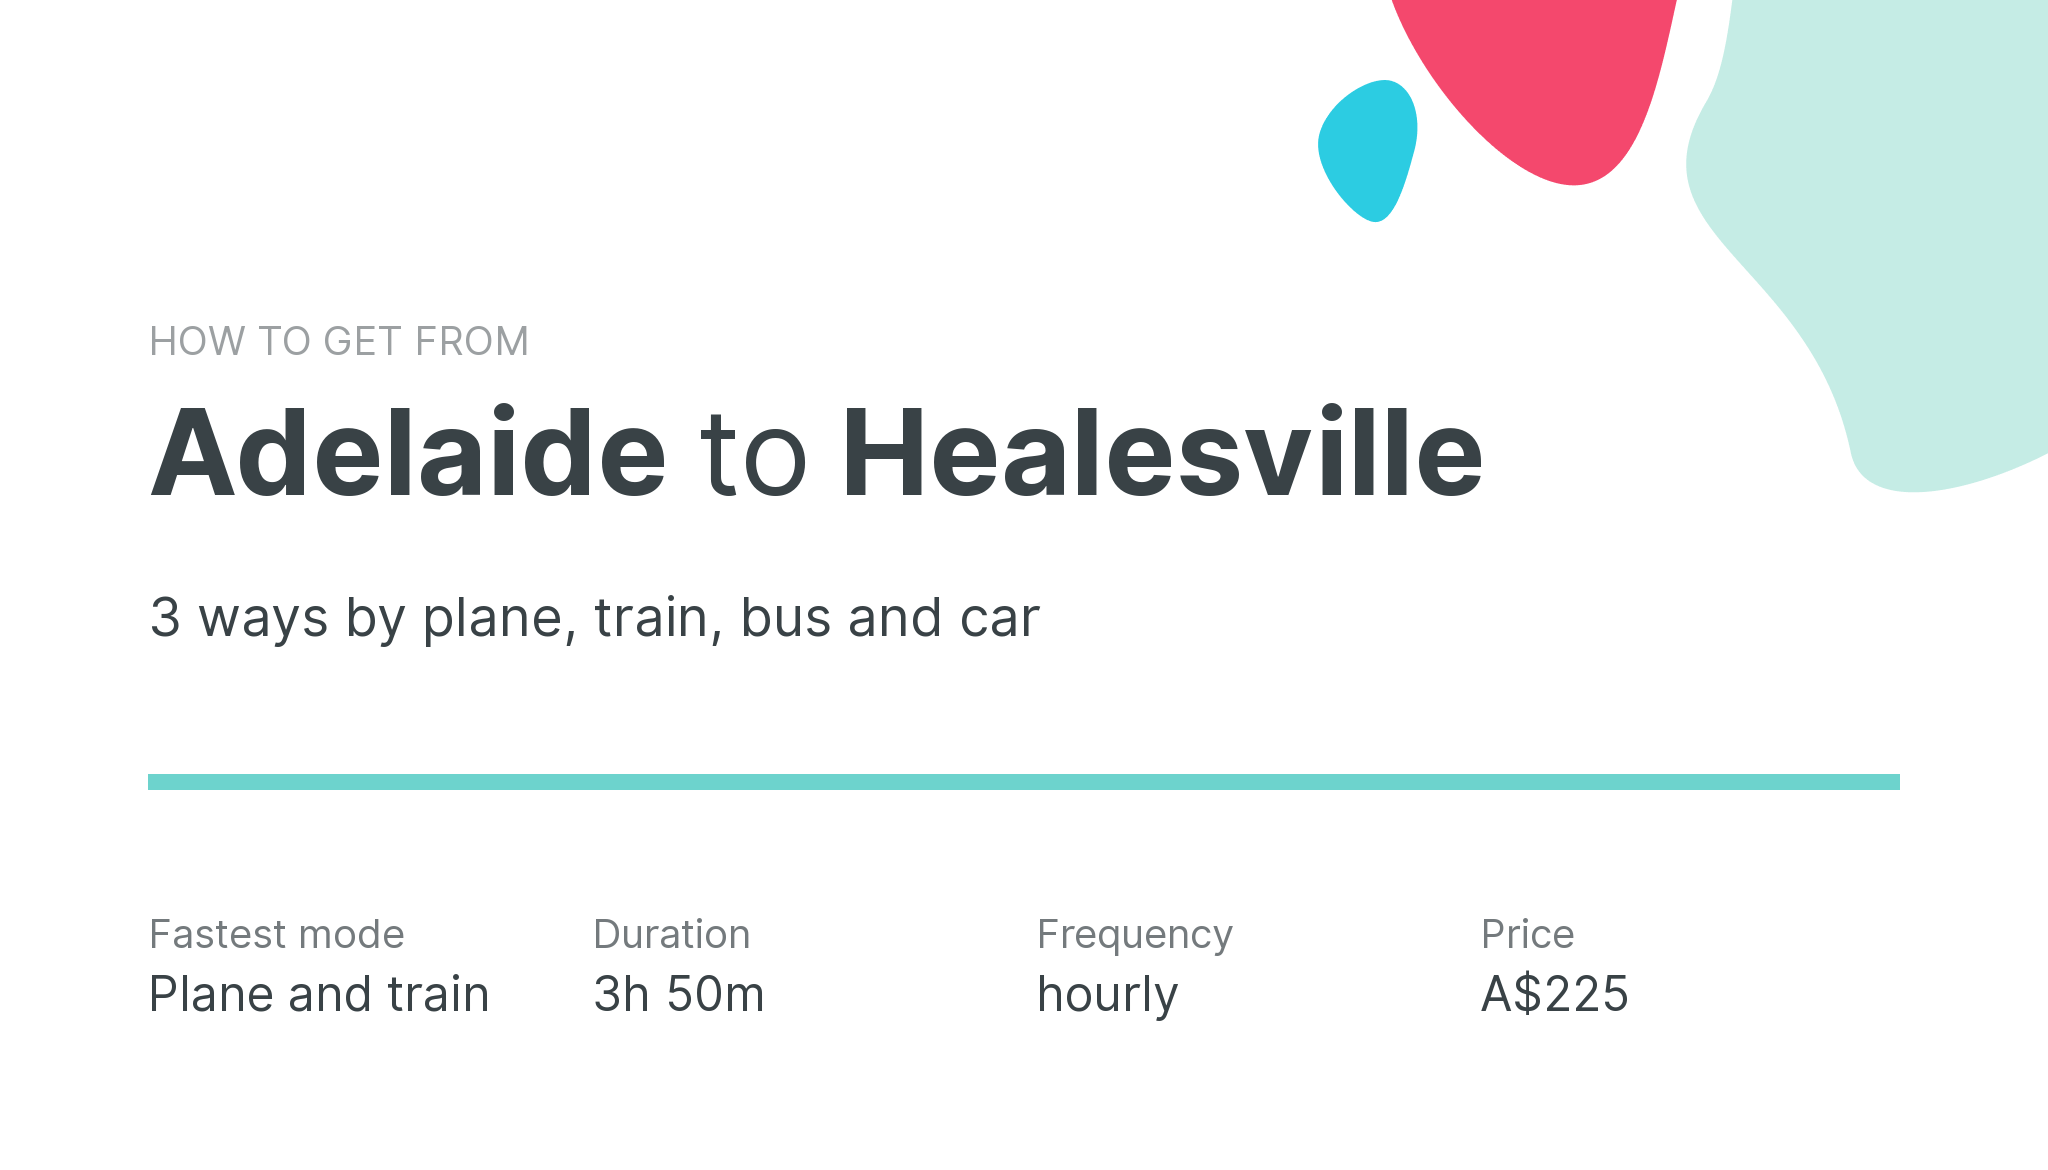 How do I get from Adelaide to Healesville